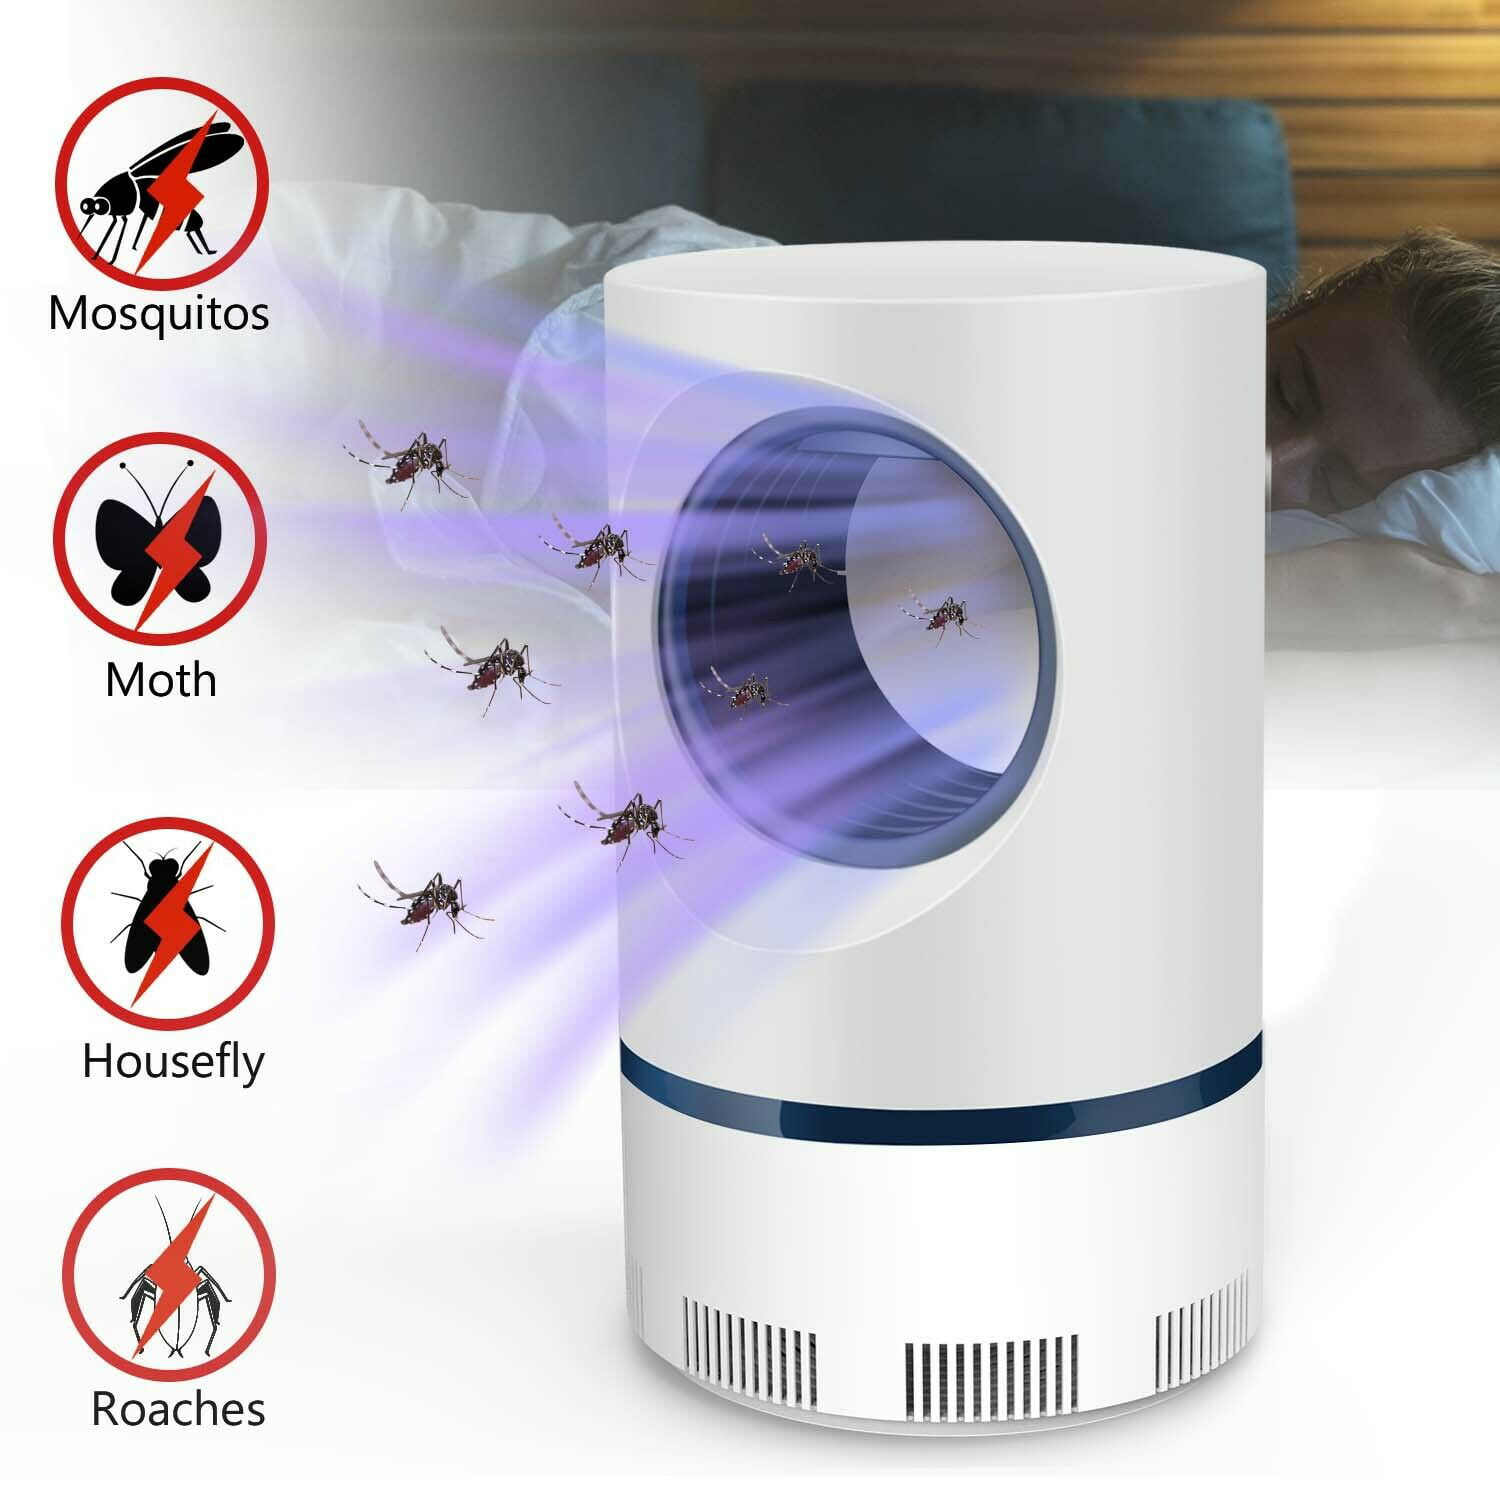 Details about   Electric Potocatalyst Mosquito Insect Killer/Bug Zapper 360Degree Lamp Trap Hot 